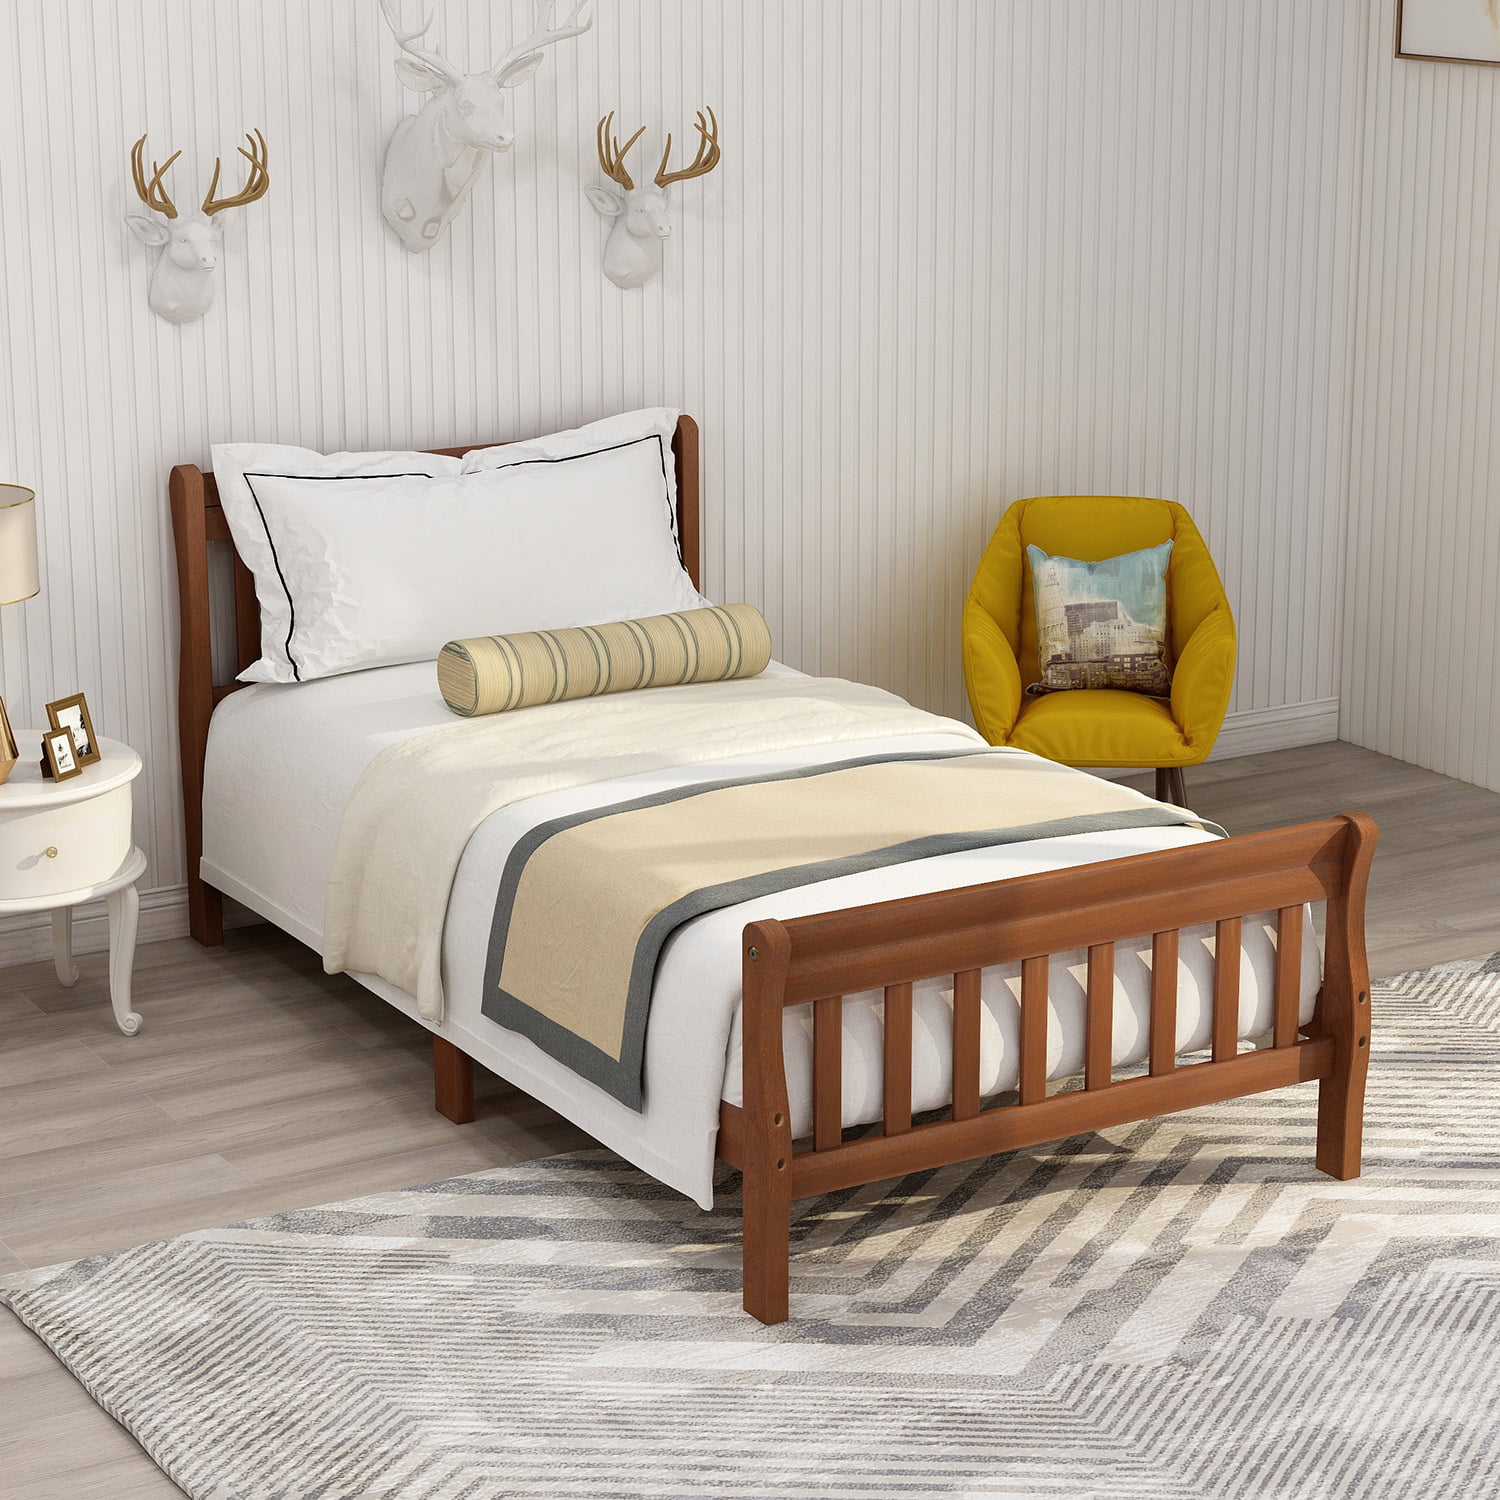 Clearance! Twin Bed Frame for Kids, Platform Bed Frame with Headboard